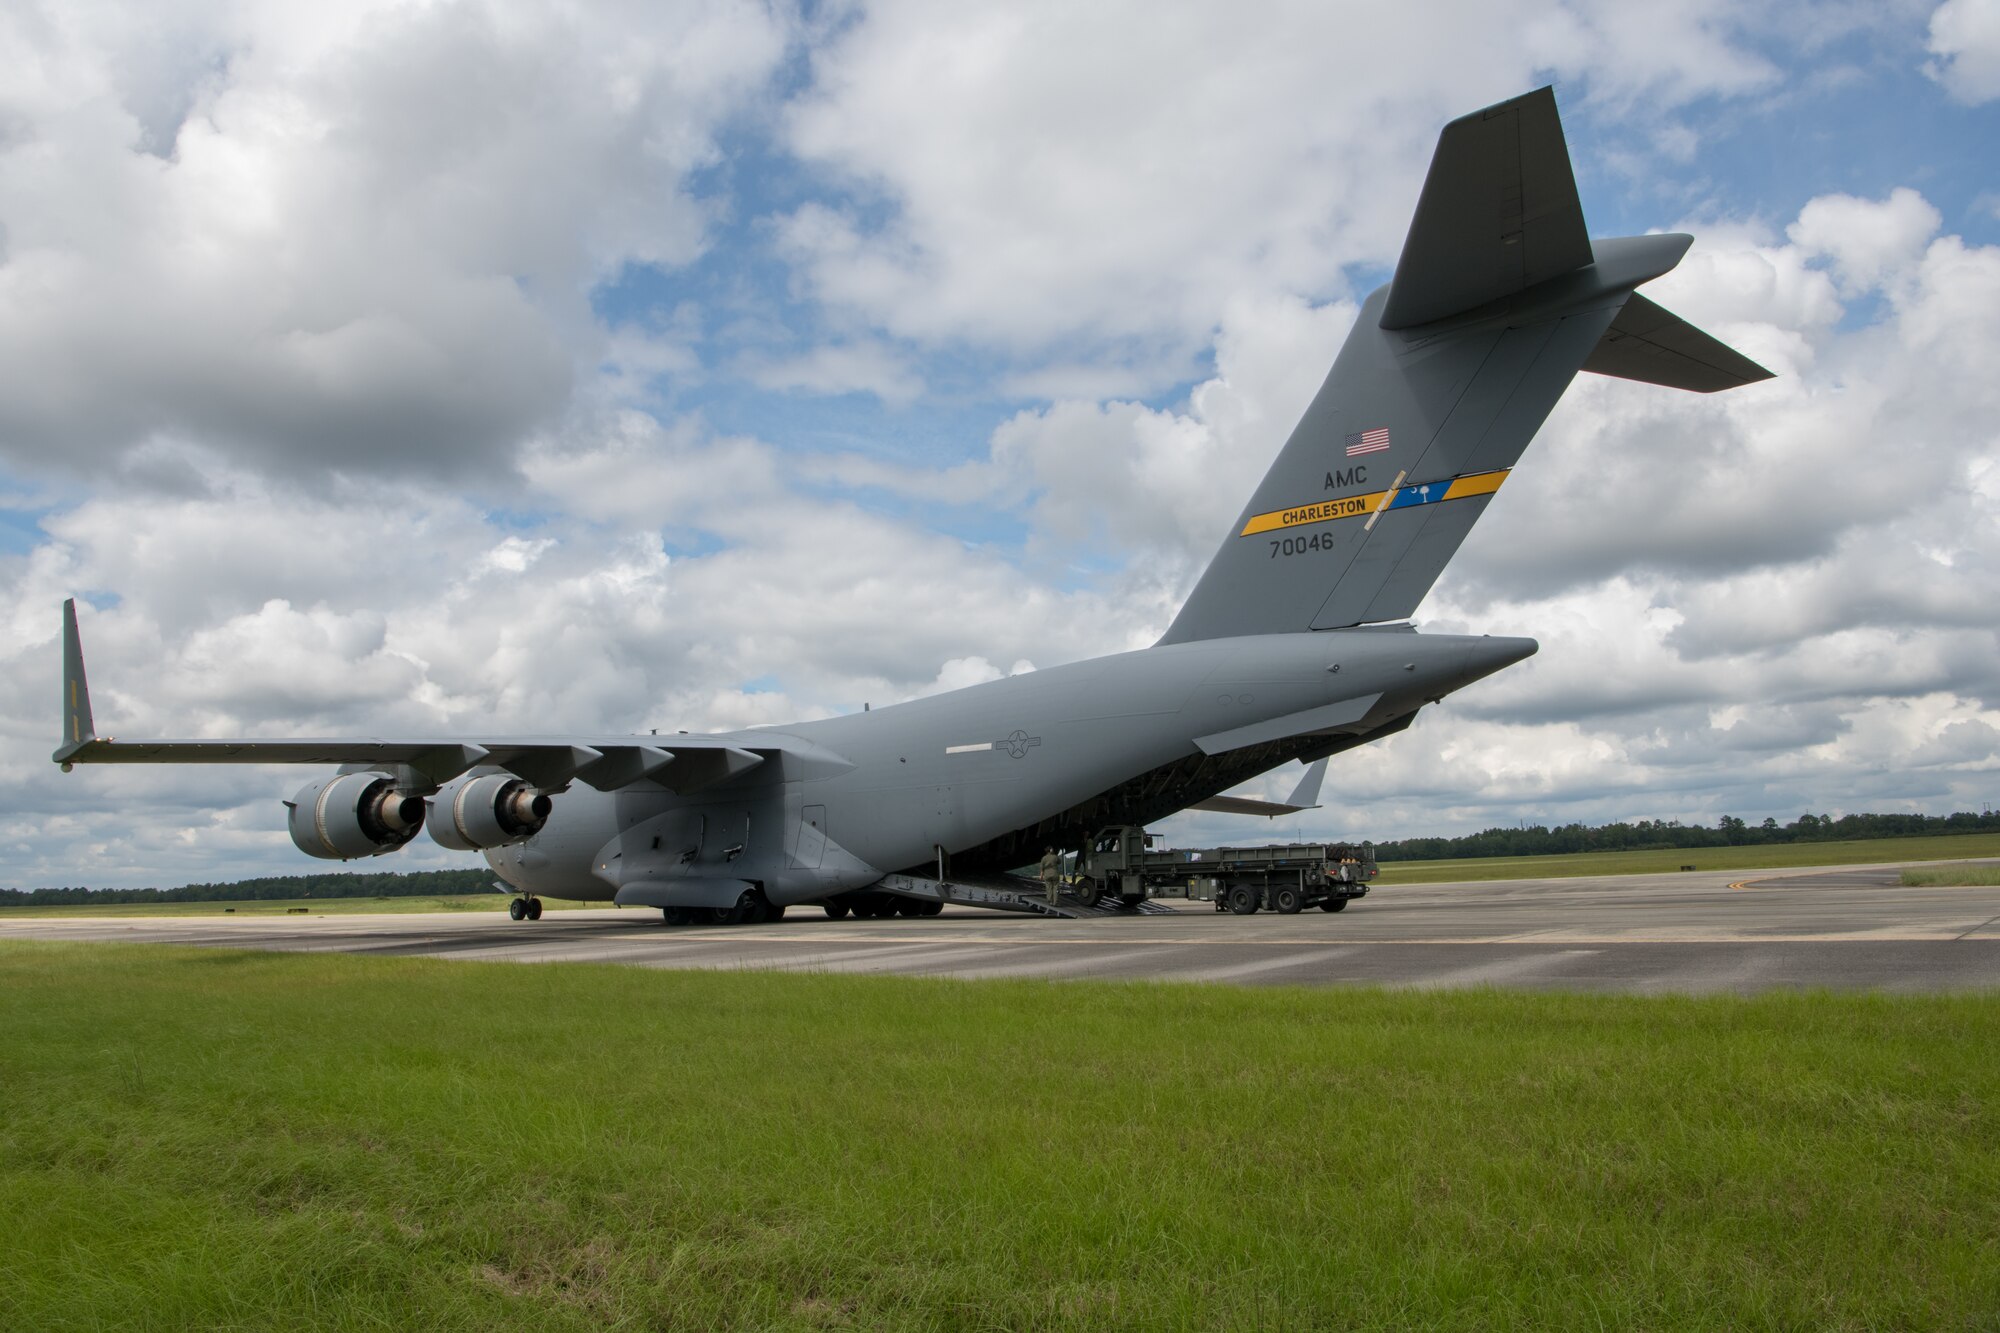 Reservists from the 315th Airlift Wing, Joint Base Charleston, S.C., unload a C-17 Globemaster III during a readiness exercise September 10, 2020 here. The exercise is in preparation for future missions and helps airmen perform their duties in a live setting.